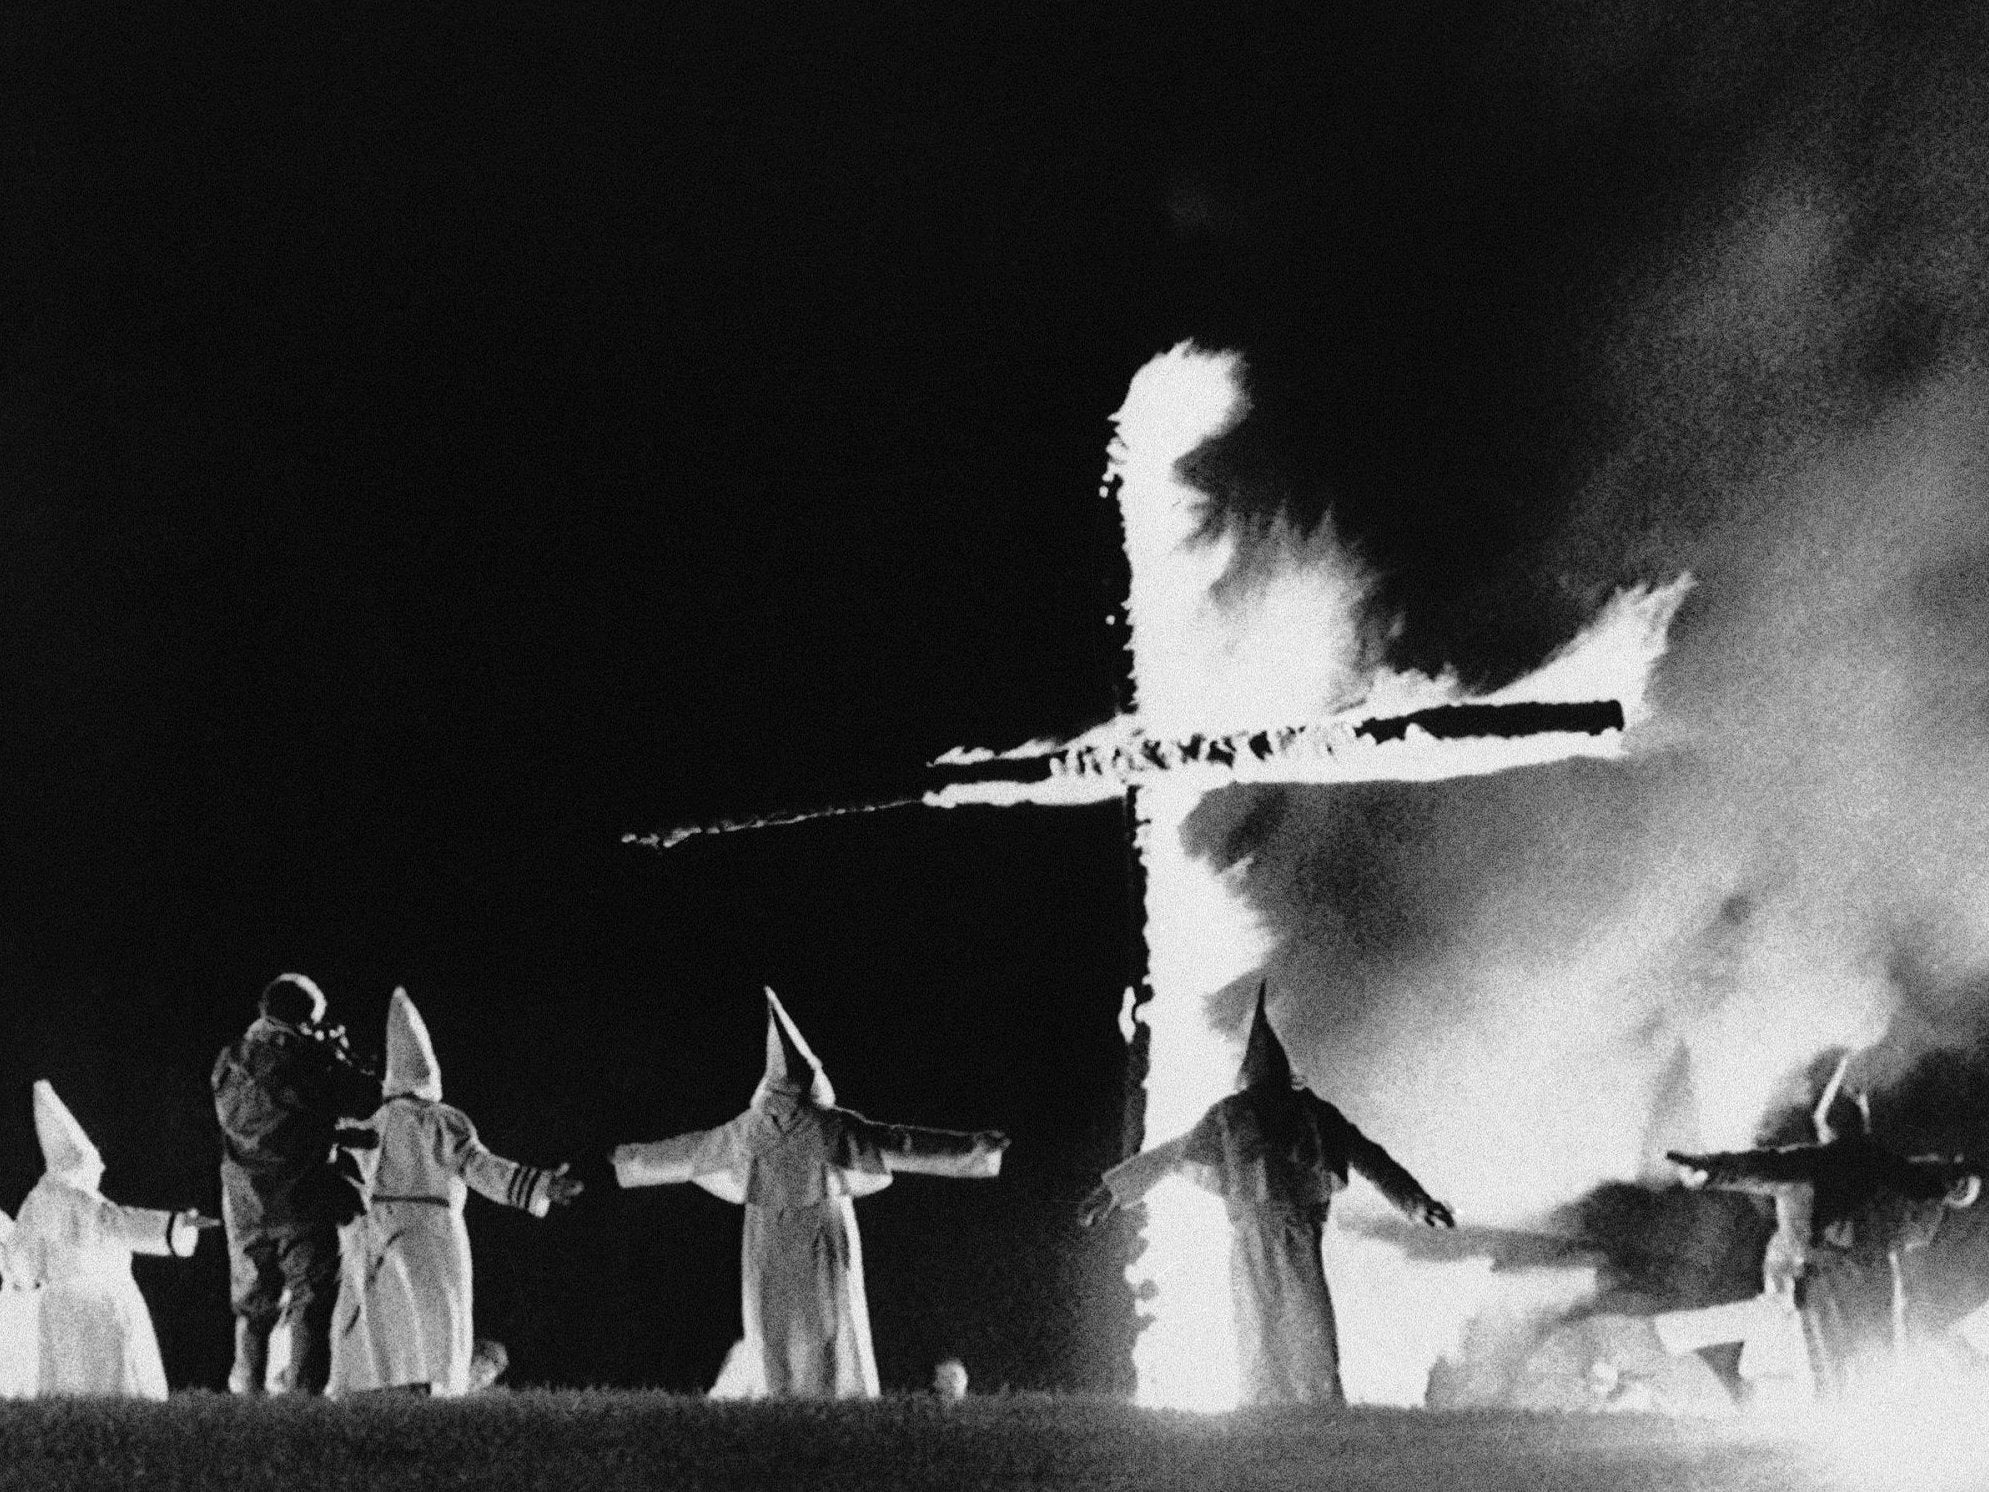 Cross-burning is historically associated with the white supremacist Ku Klux Klan (File photo)